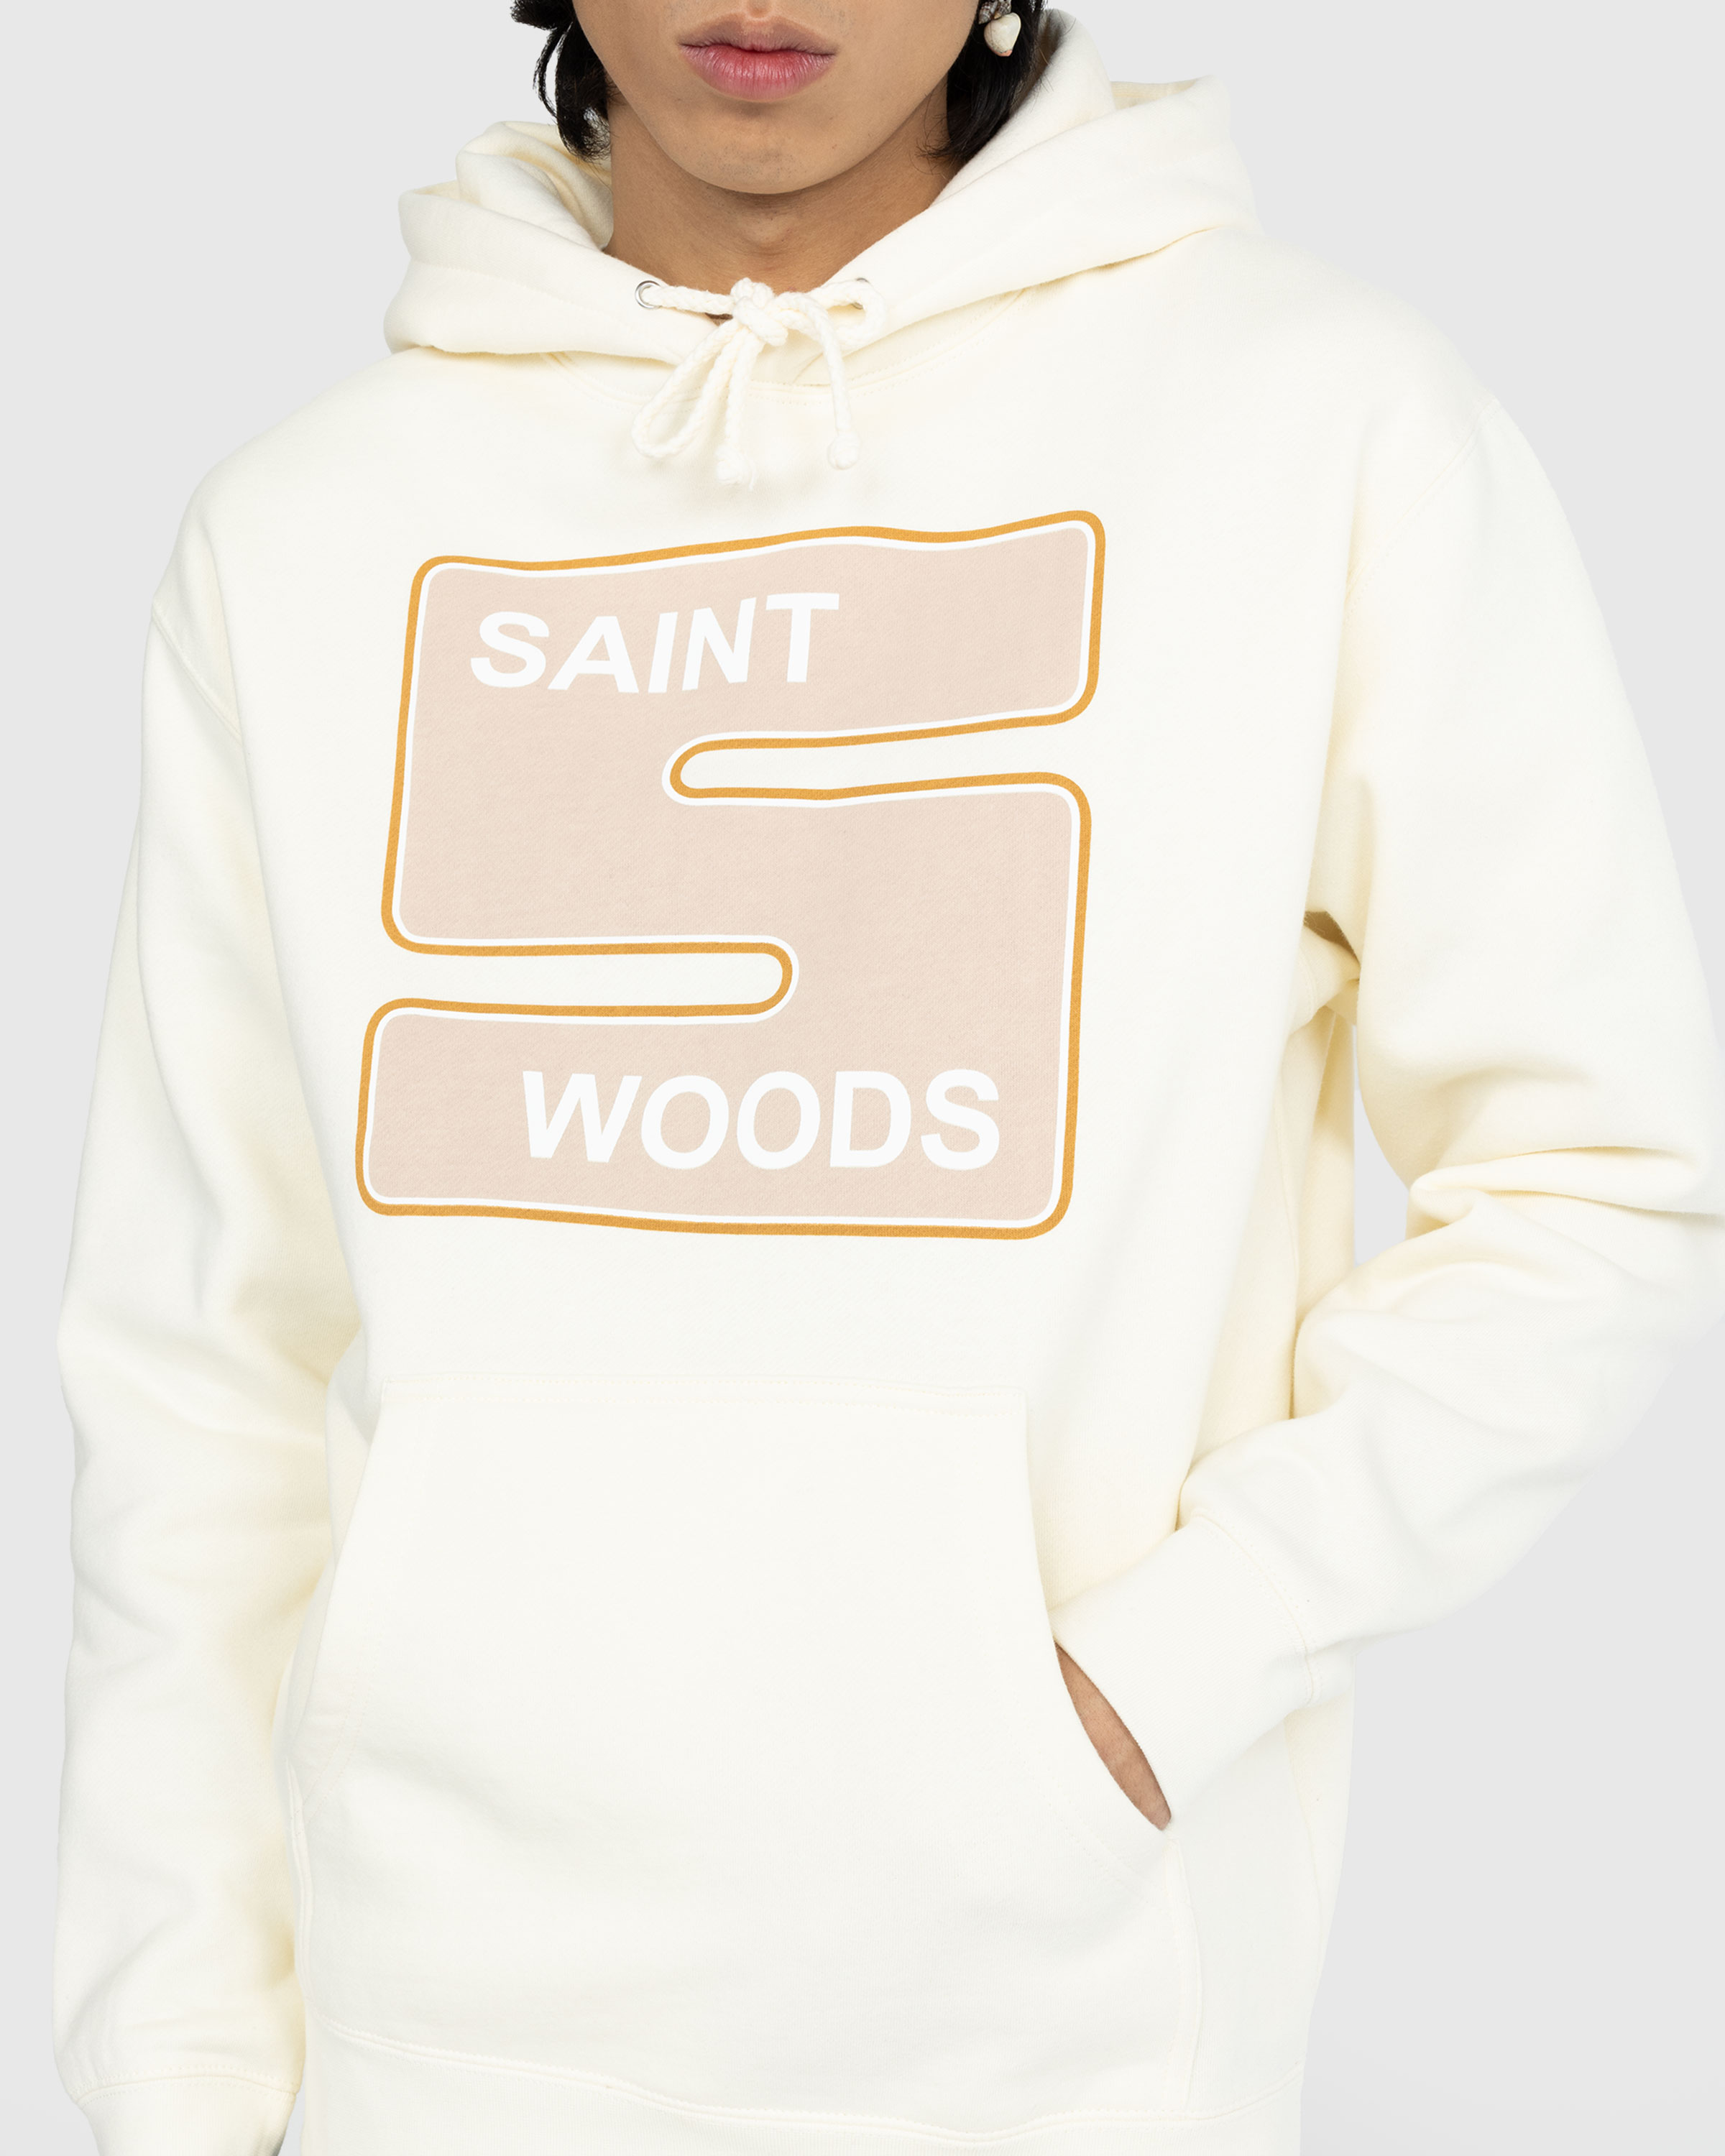 Saintwoods - You Go Hoodie Natural - Clothing - Beige - Image 5